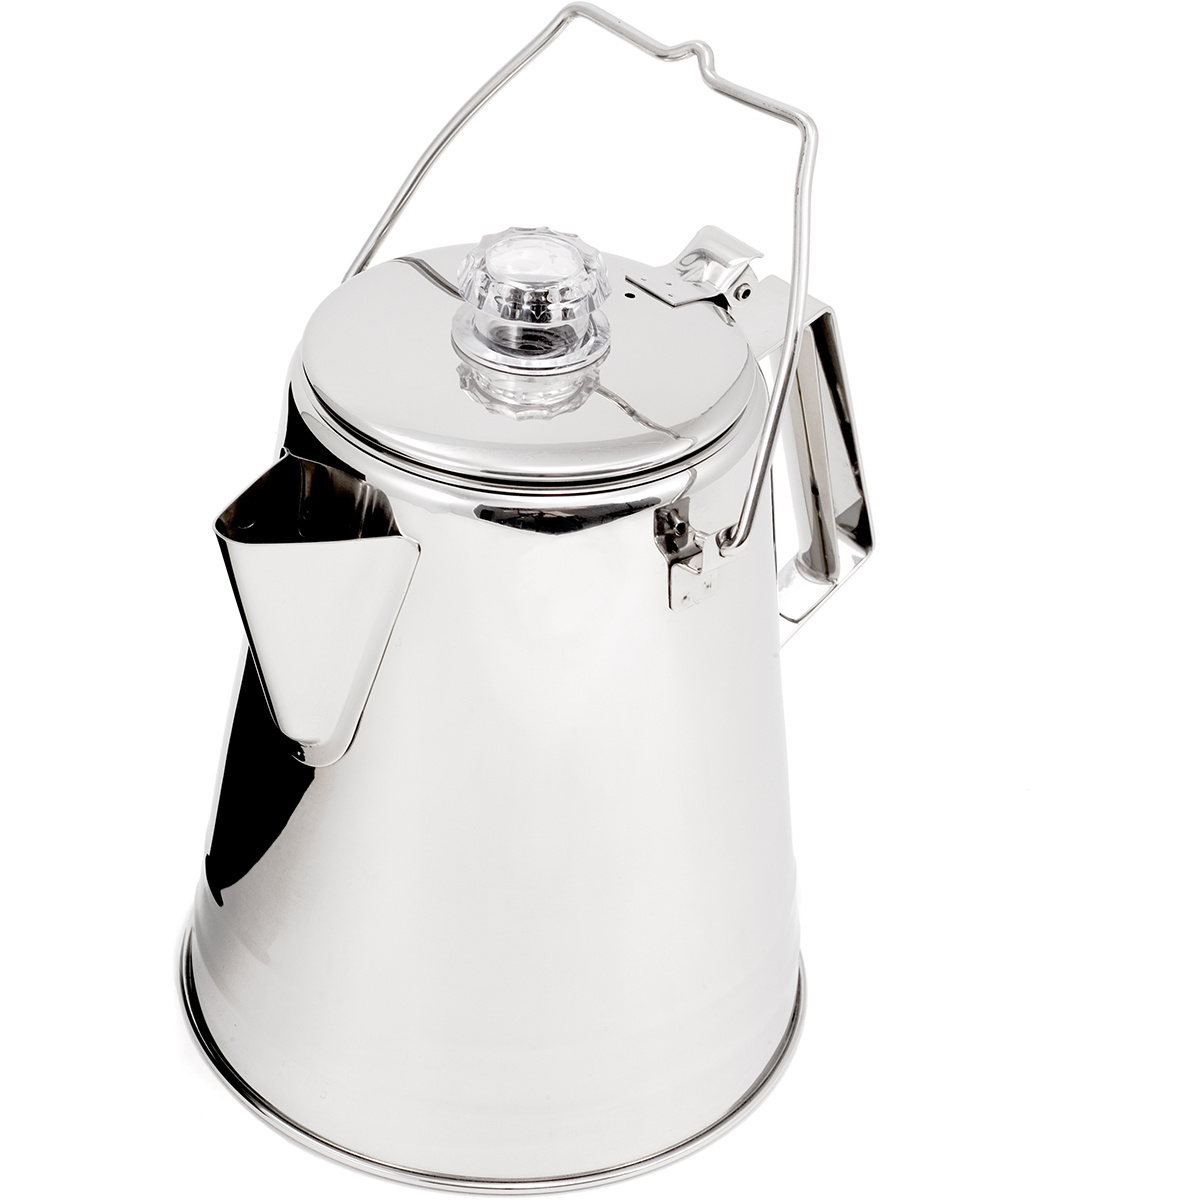 Image of GSI Caffettiera 14 Cup Percolator Glacier Stainless